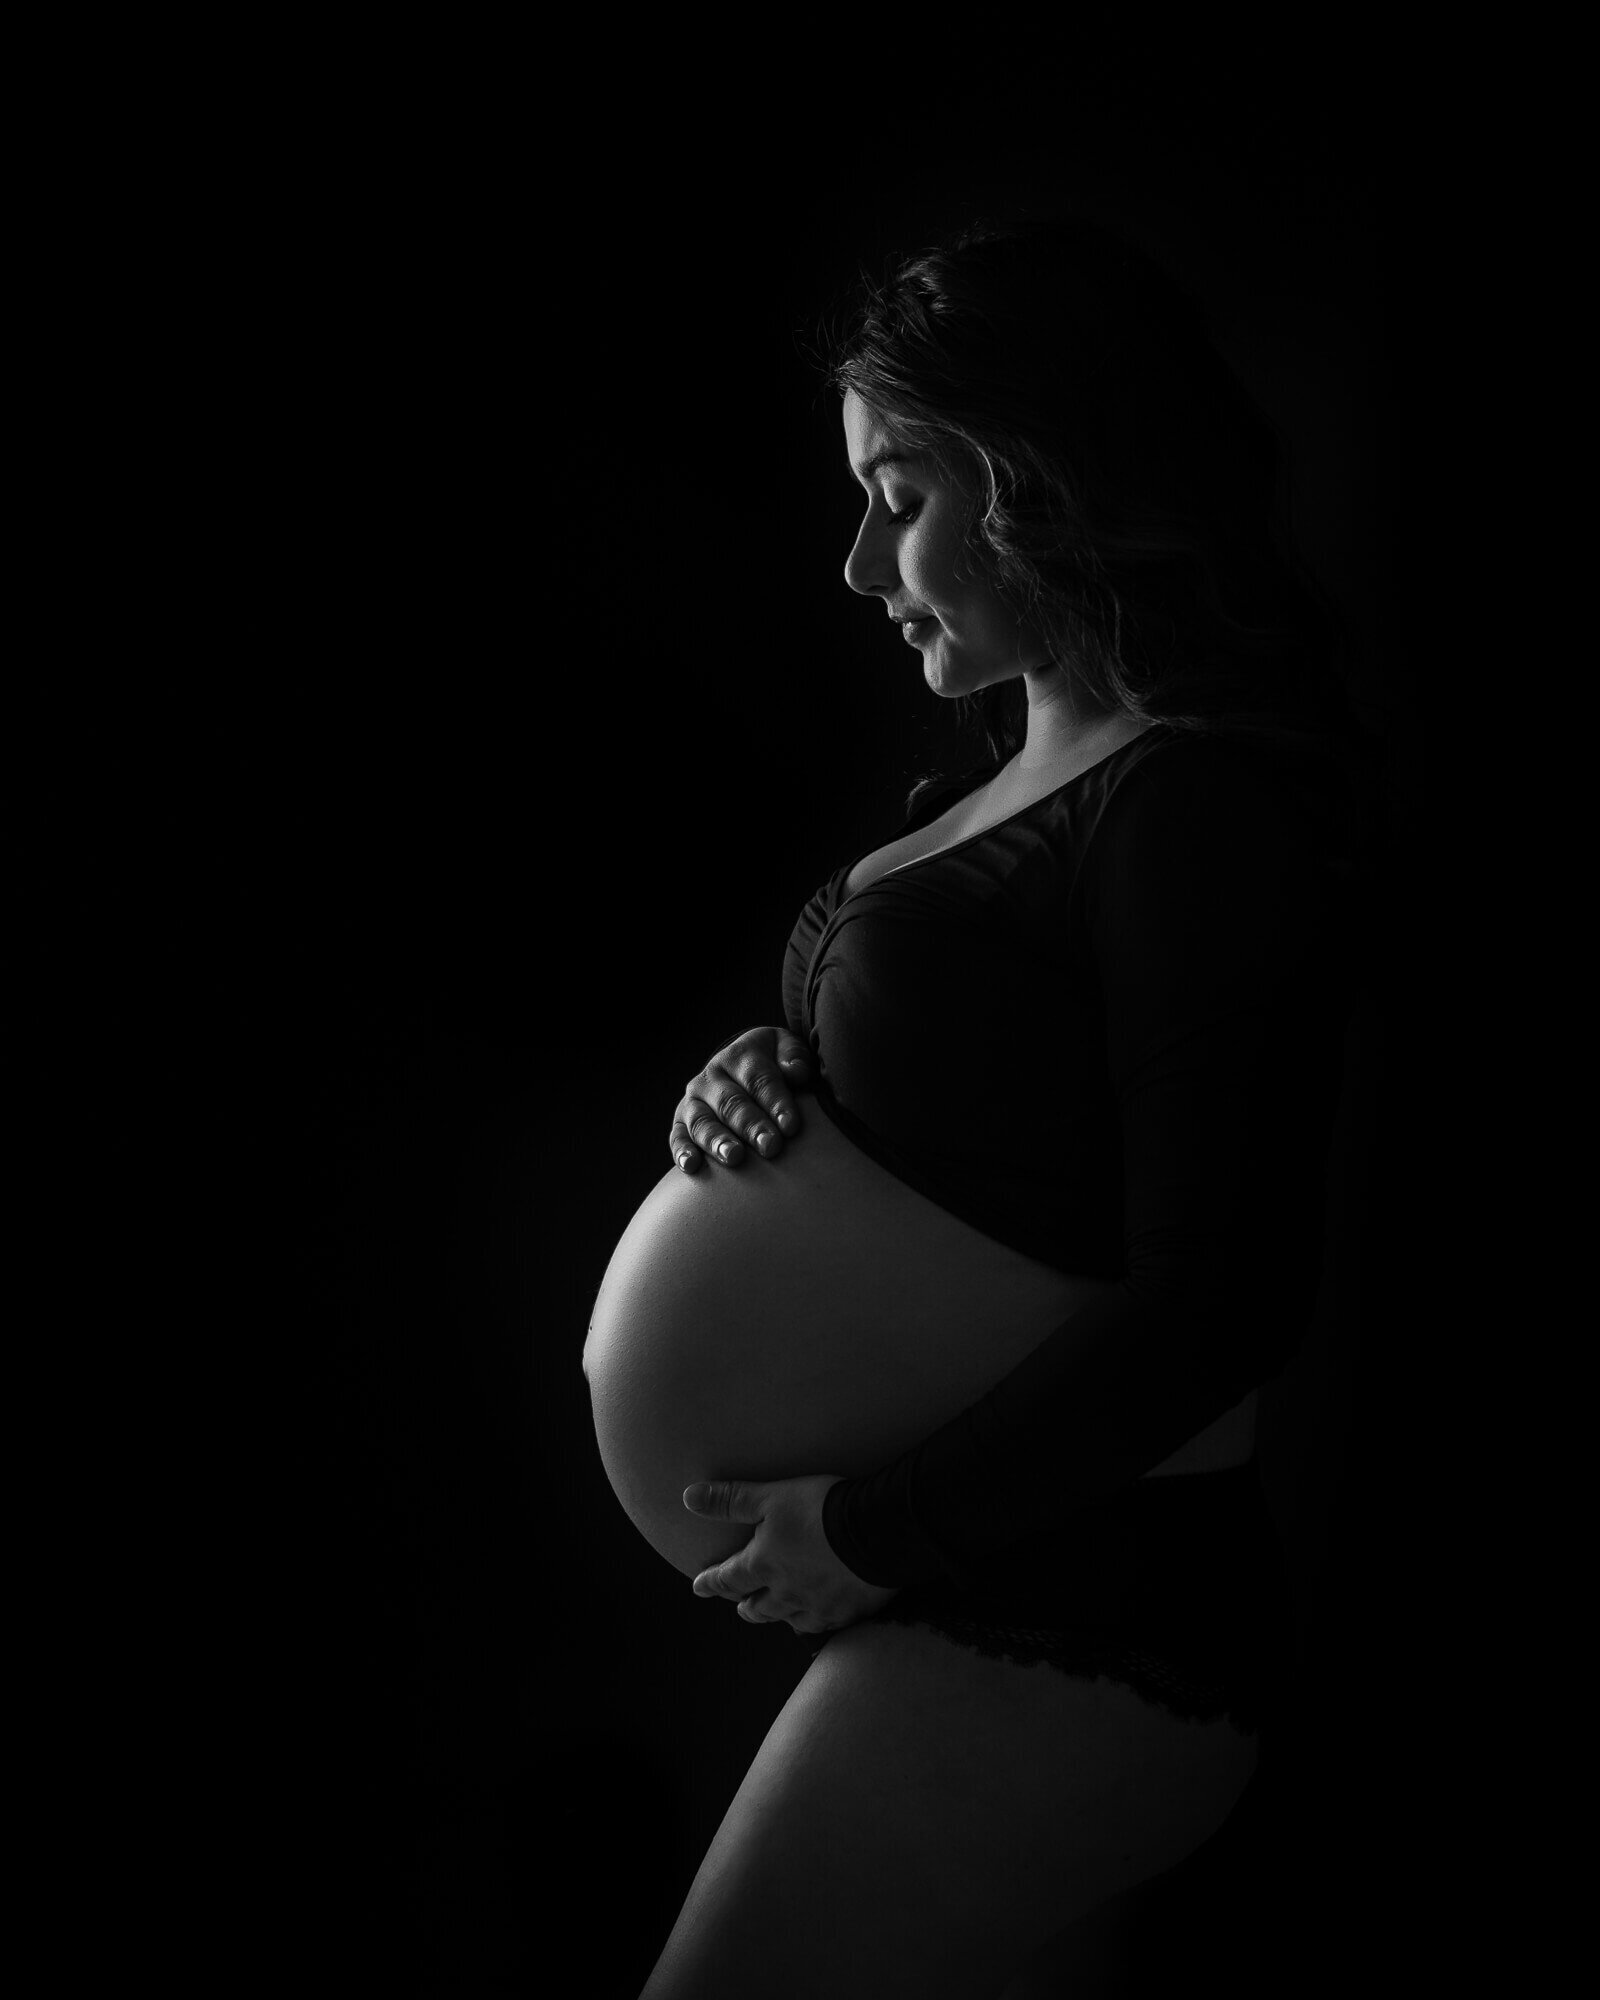 low-key rim lighting profile picture of pregnant woman